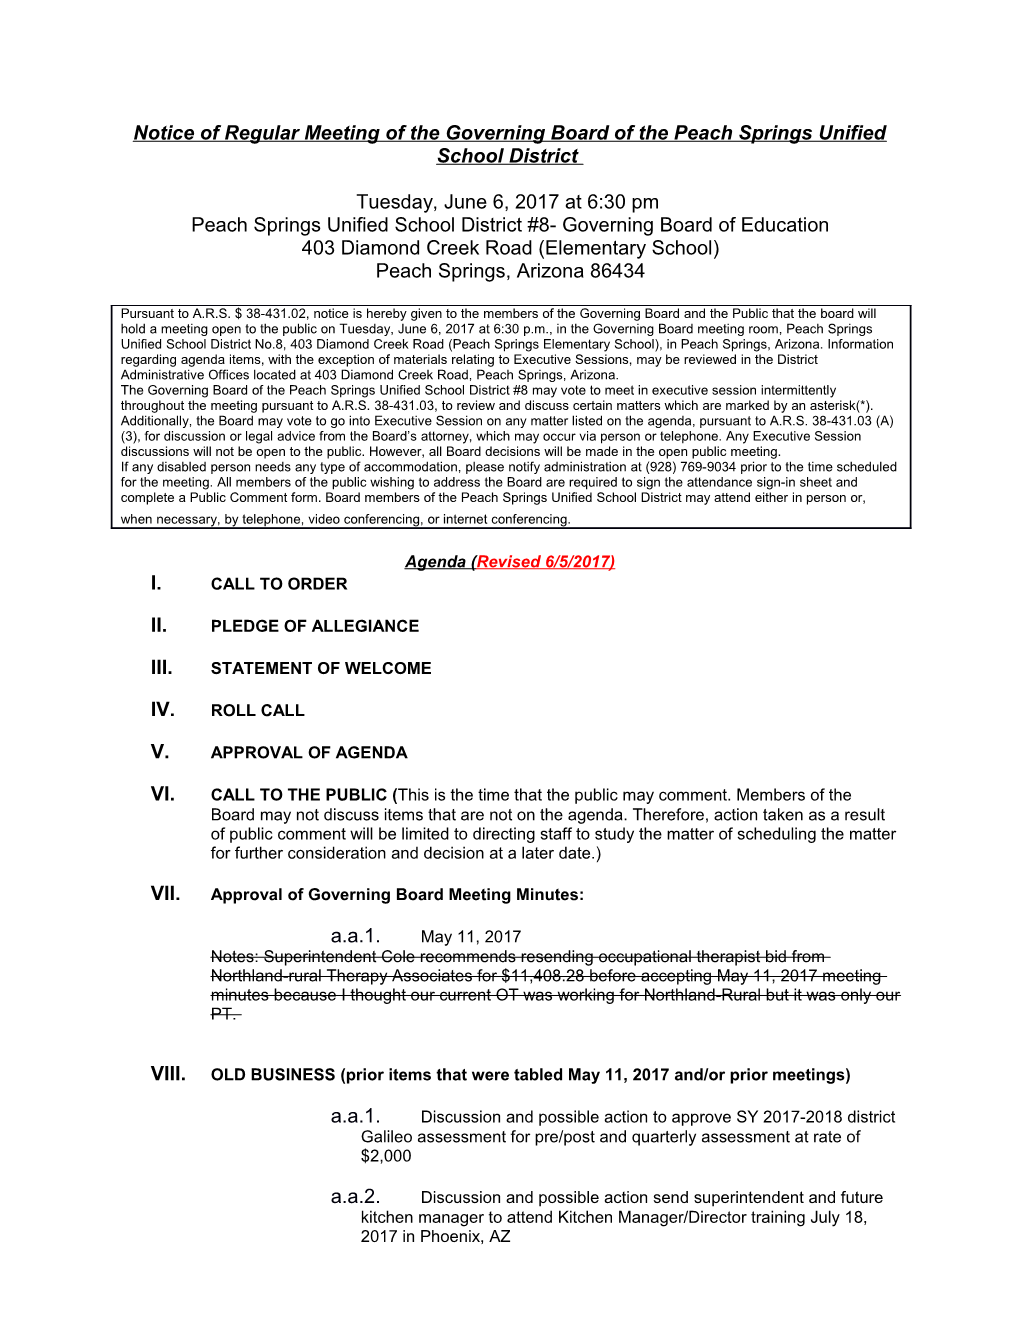 Noticeof Regular Meeting of the Governing Board of the Peach Springs Unified School District